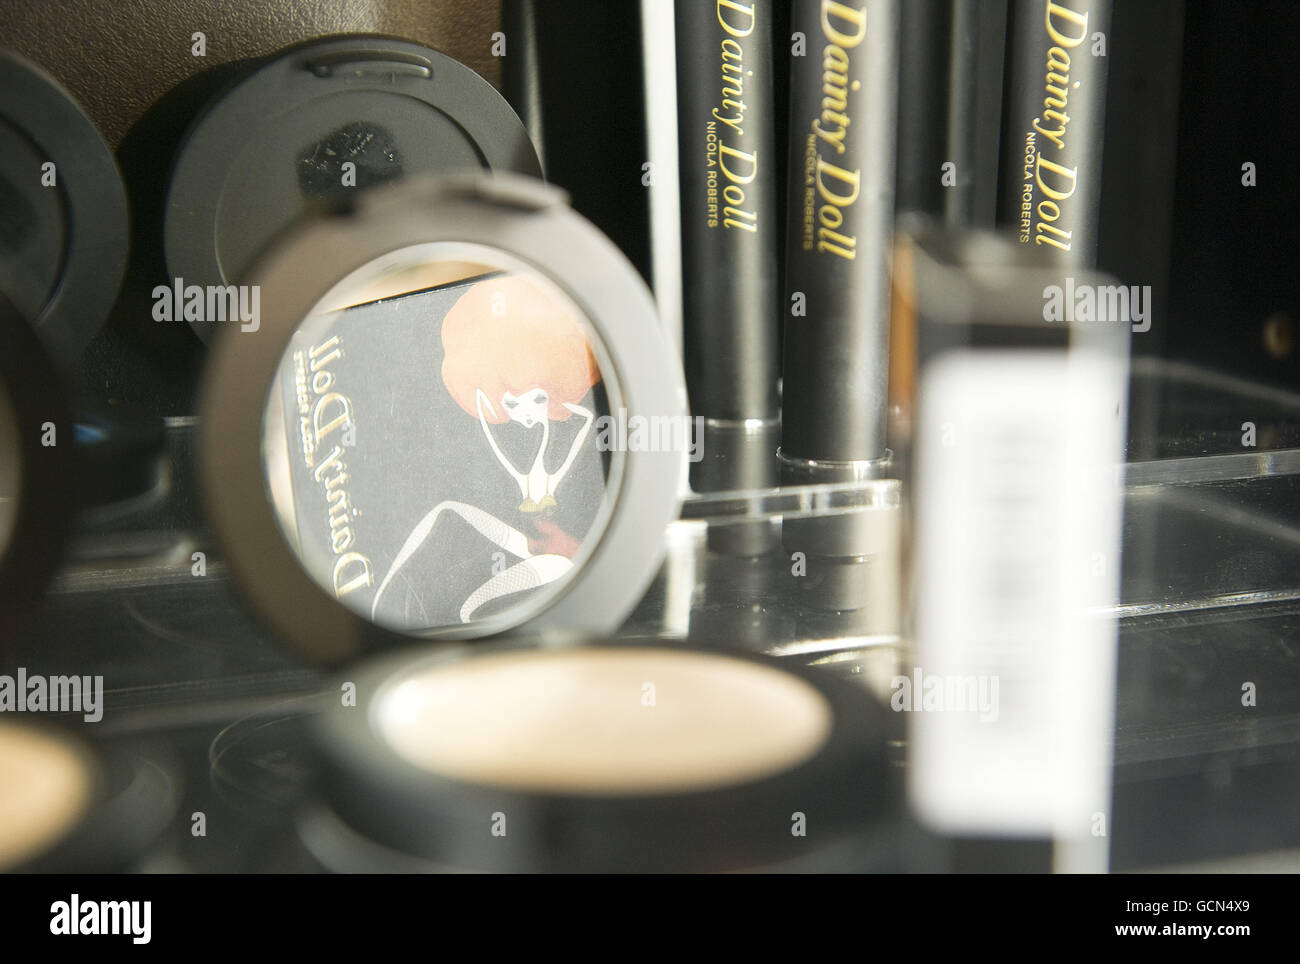 Nicola Roberts' Dainty Doll make-up range, which was launched today at Harrods in London. Stock Photo